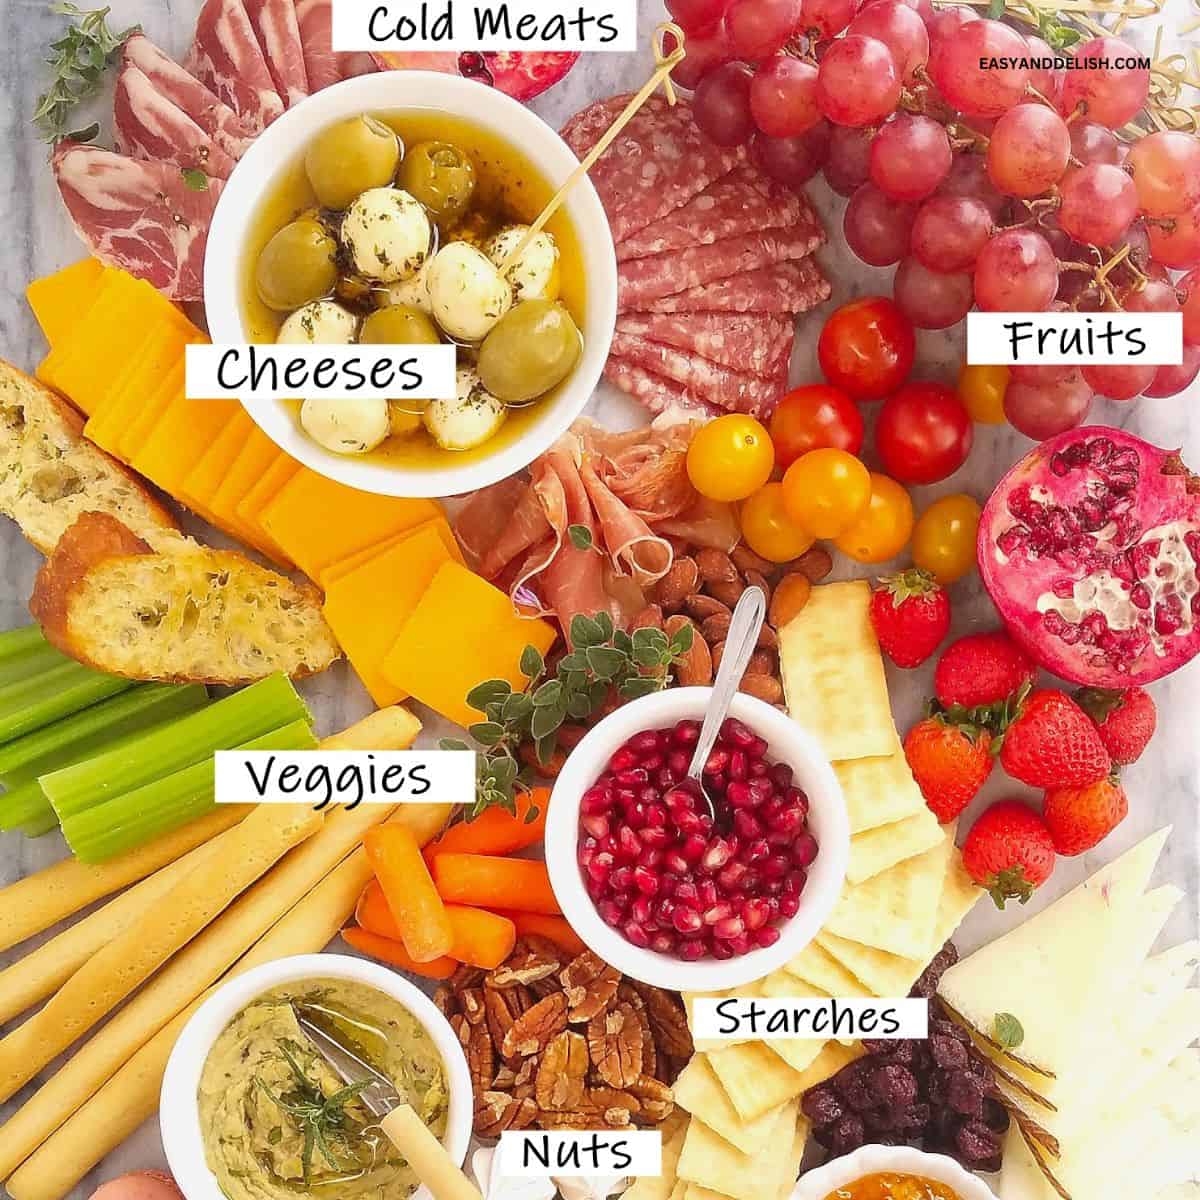 https://www.easyanddelish.com/wp-content/uploads/2020/12/easy-charcuterie-board-featured-image.jpg